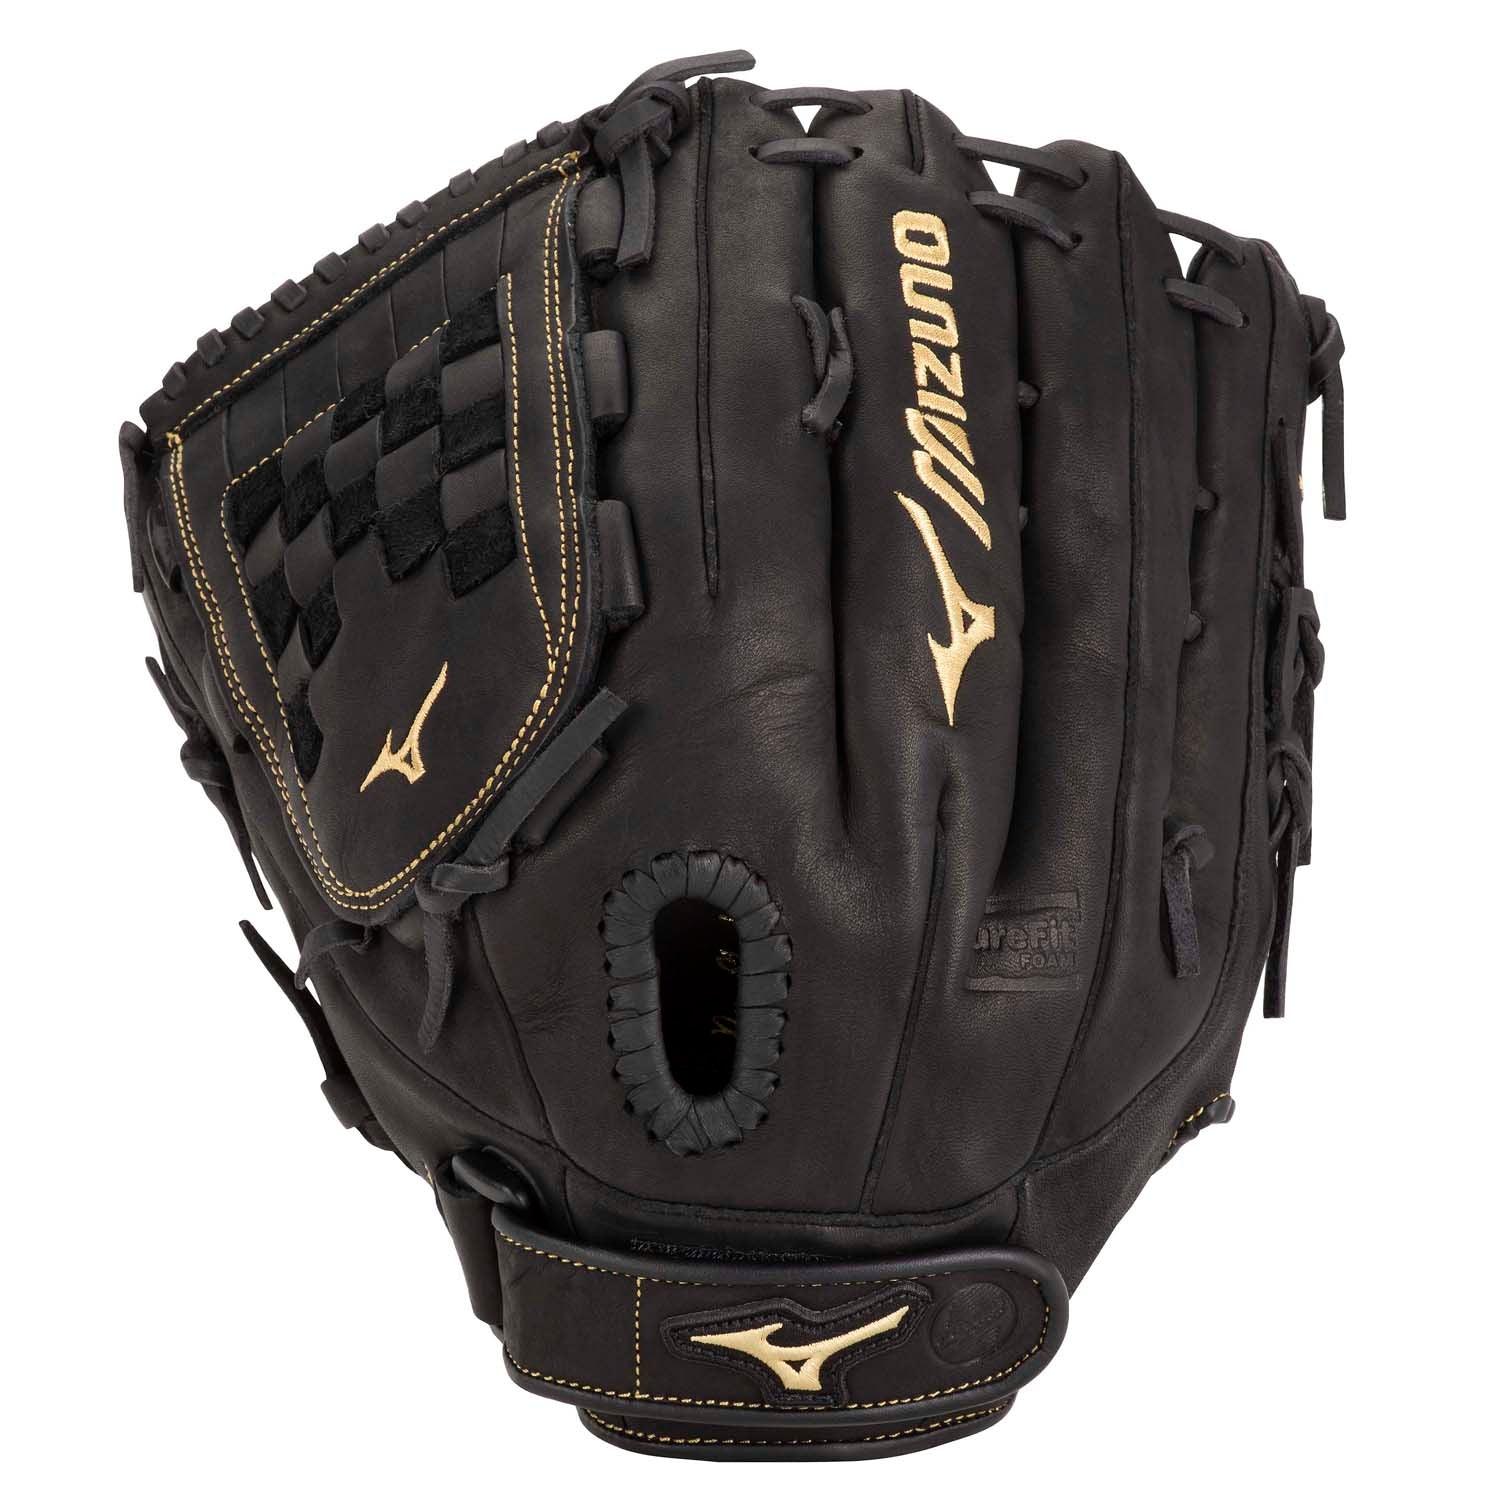 MVP Prime Fastpitch Softball Glove 12.5" - Sports Excellence